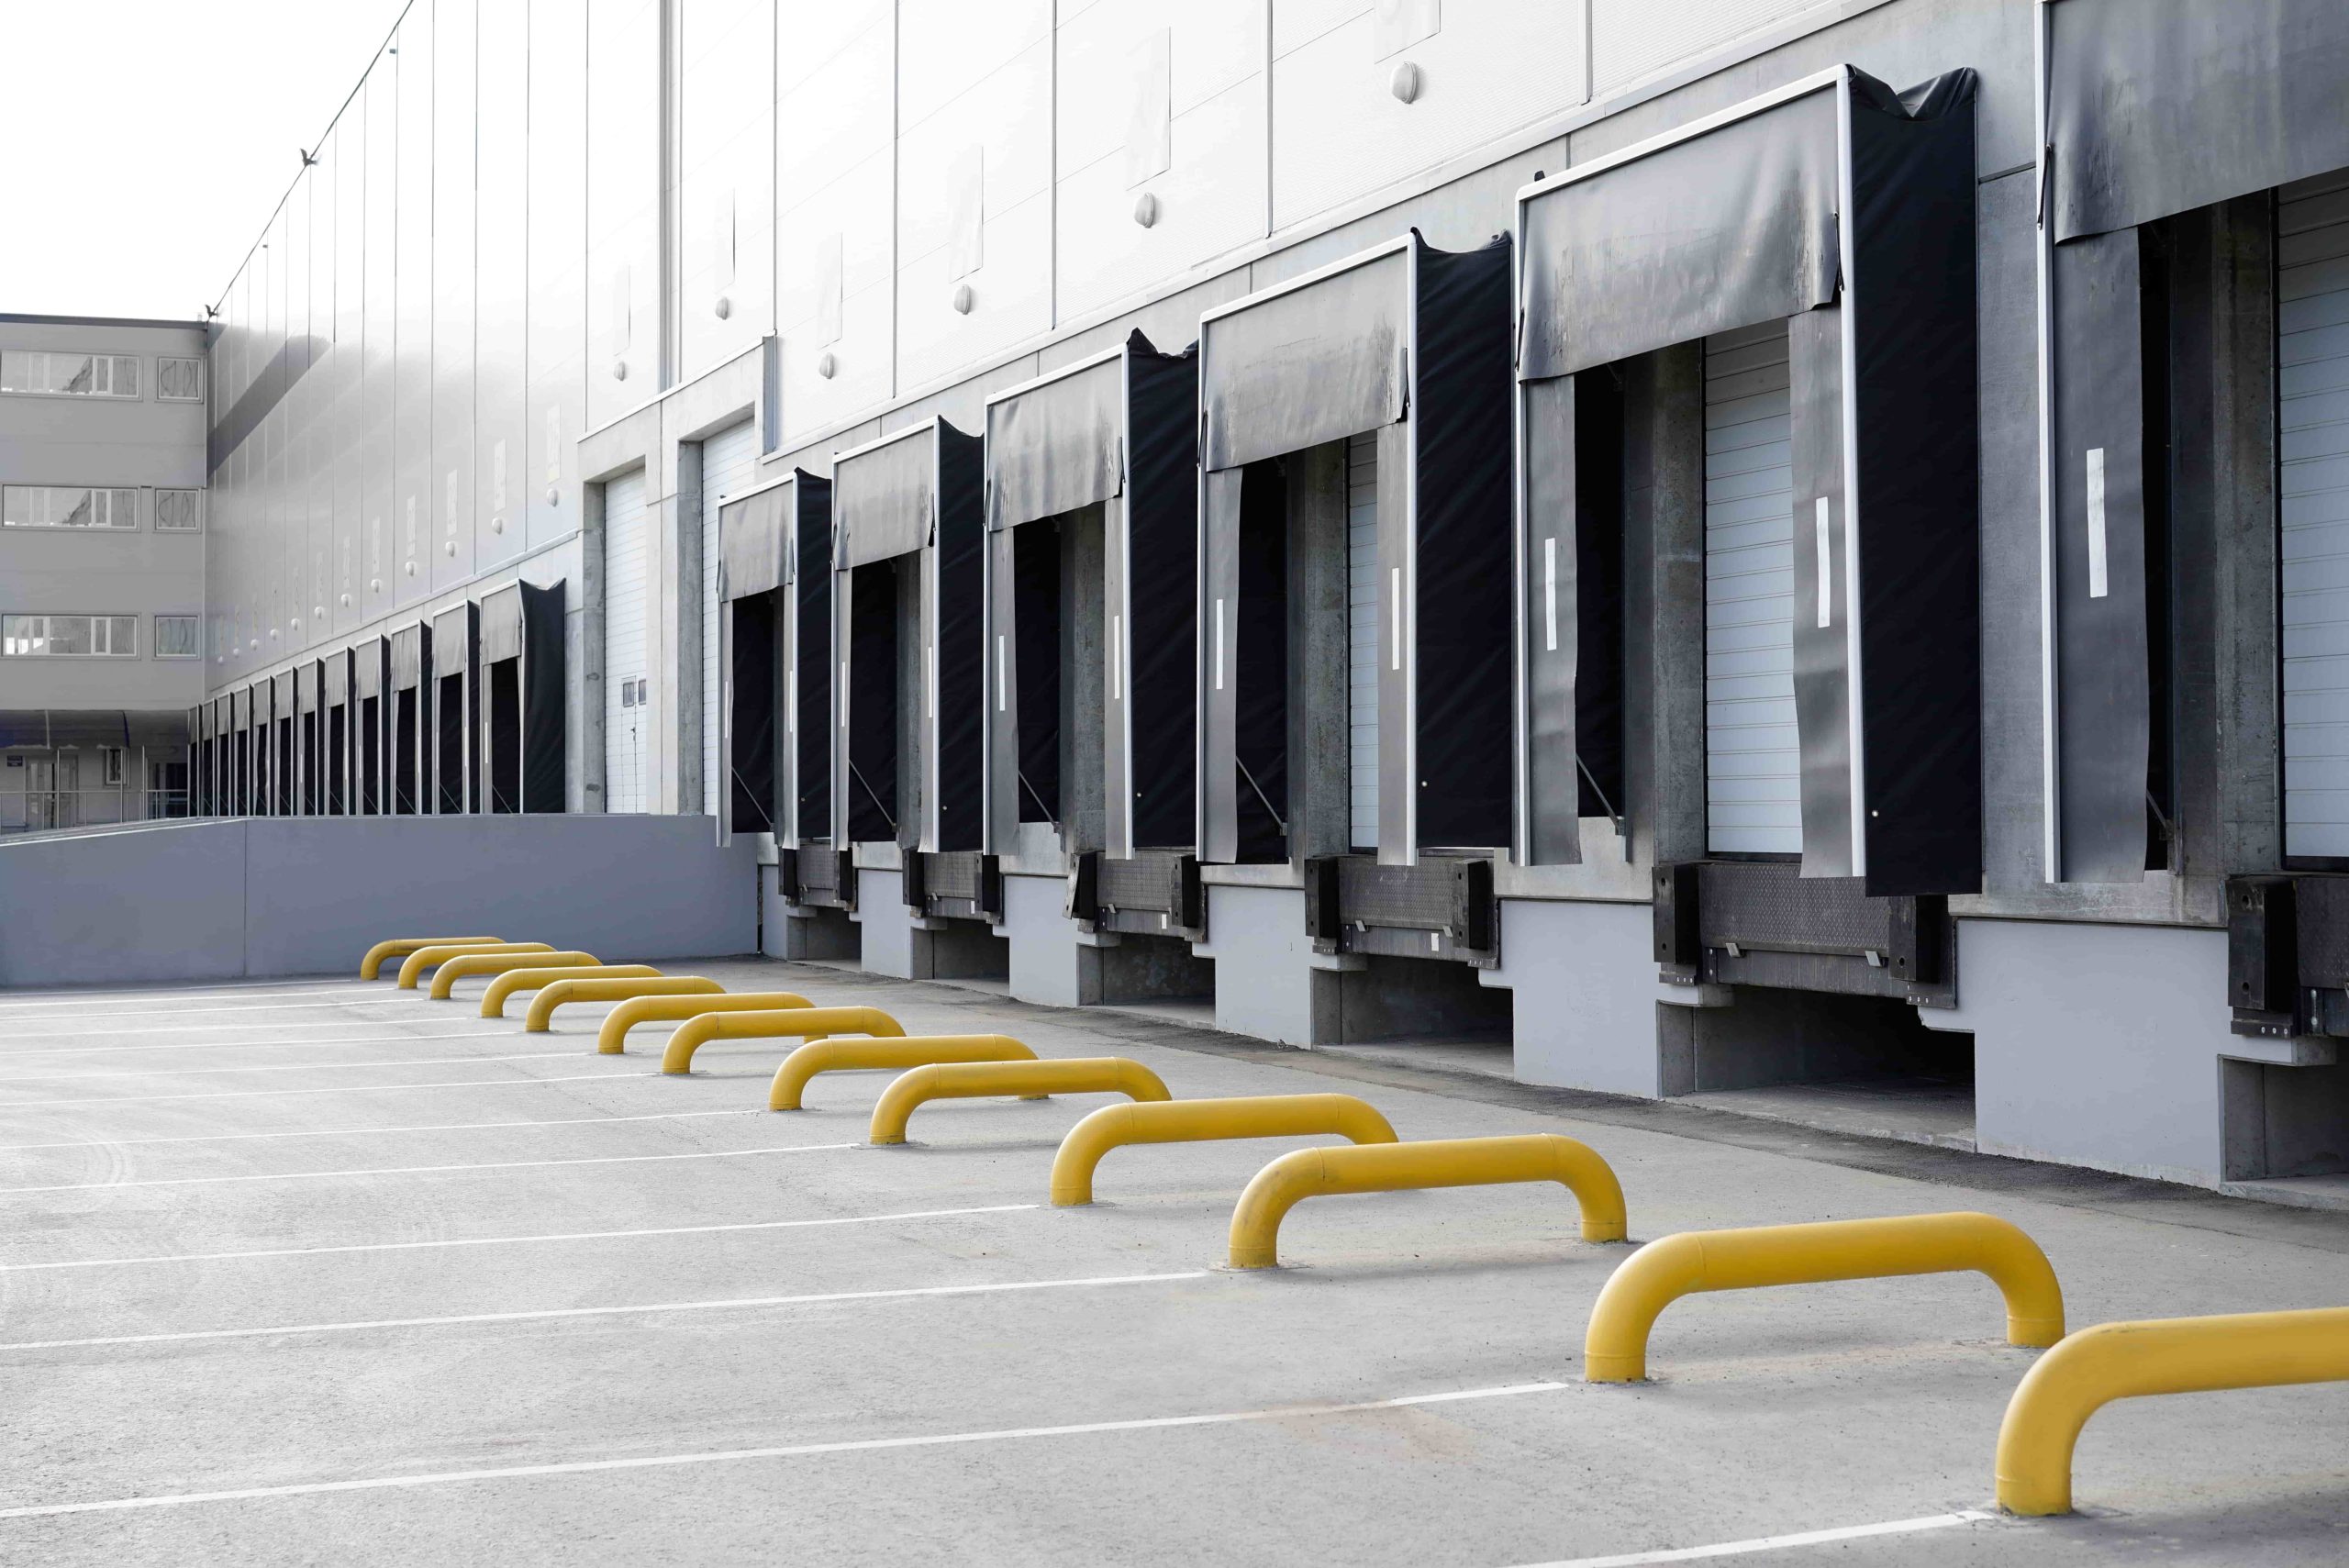 Receiving area of a warehouse with a row of loading docks